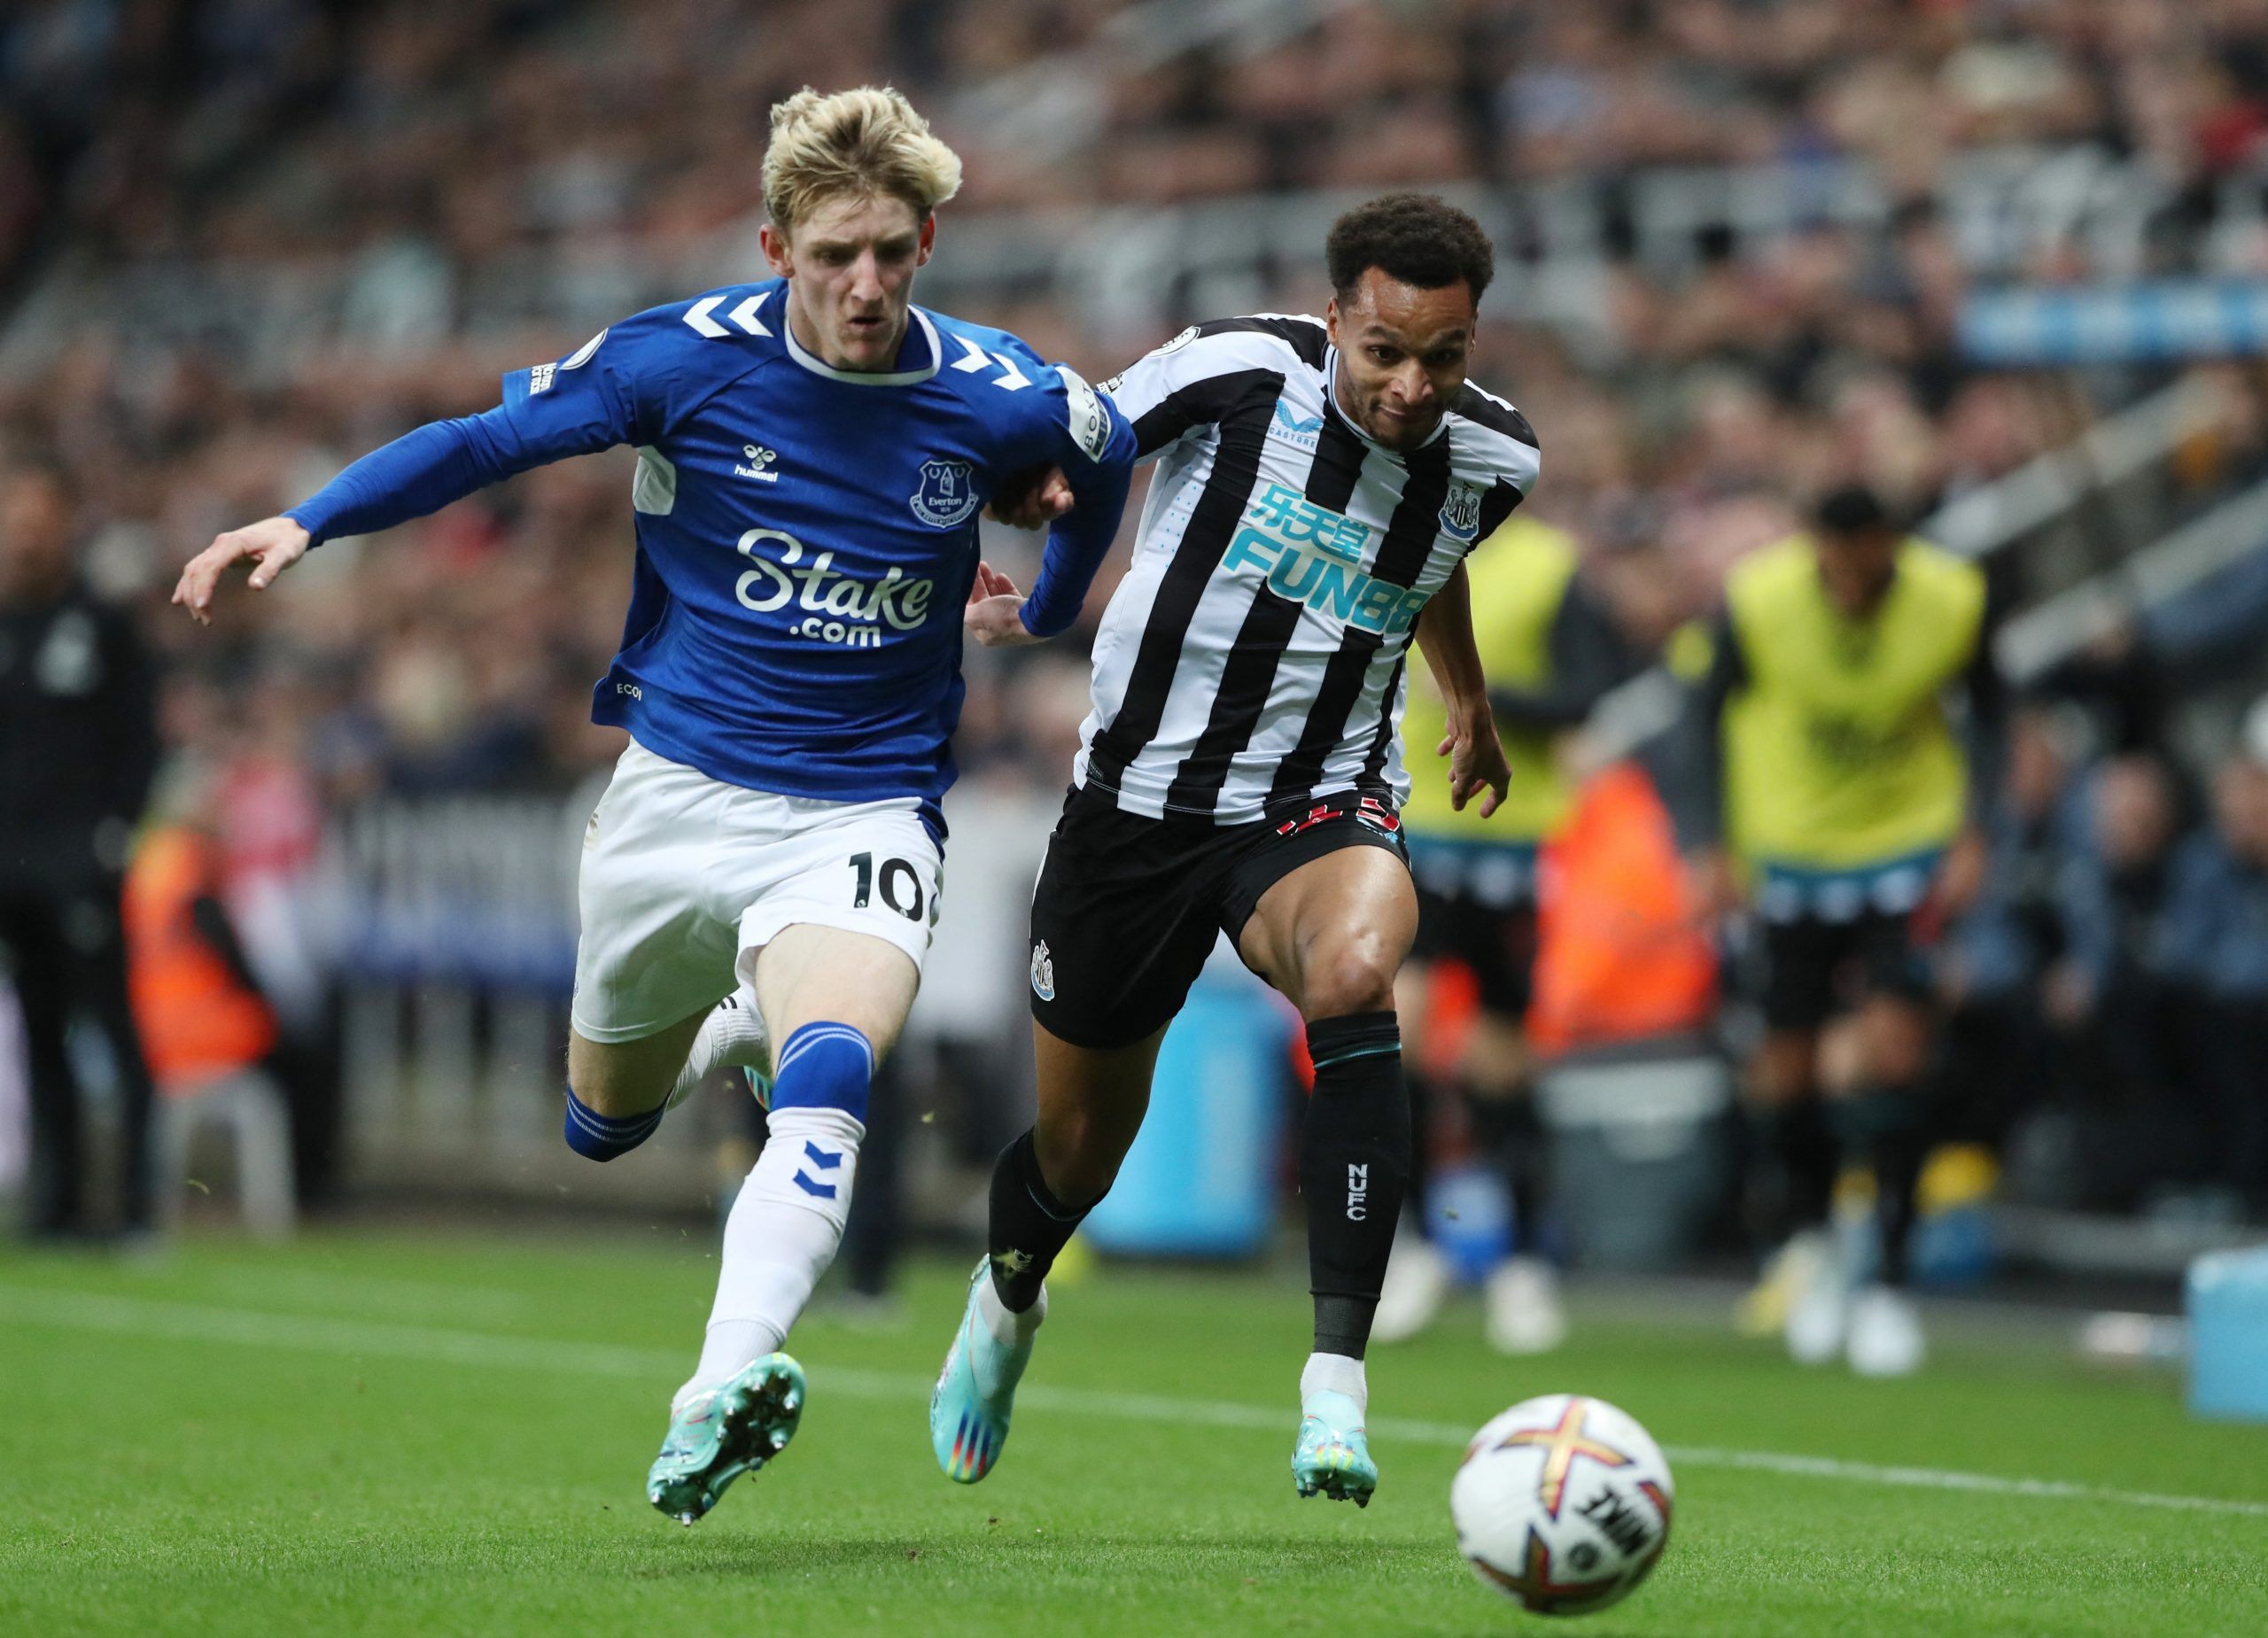 Soccer Football - Premier League - Newcastle United v Everton - St James' Park, Newcastle, Britain - October 19, 2022 Everton's Anthony Gordon in action with Newcastle United's Jacob Murphy REUTERS/Scott Heppell EDITORIAL USE ONLY. No use with unauthorized audio, video, data, fixture lists, club/league logos or 'live' services. Online in-match use limited to 75 images, no video emulation. No use in betting, games or single club /league/player publications.  Please contact your account representa